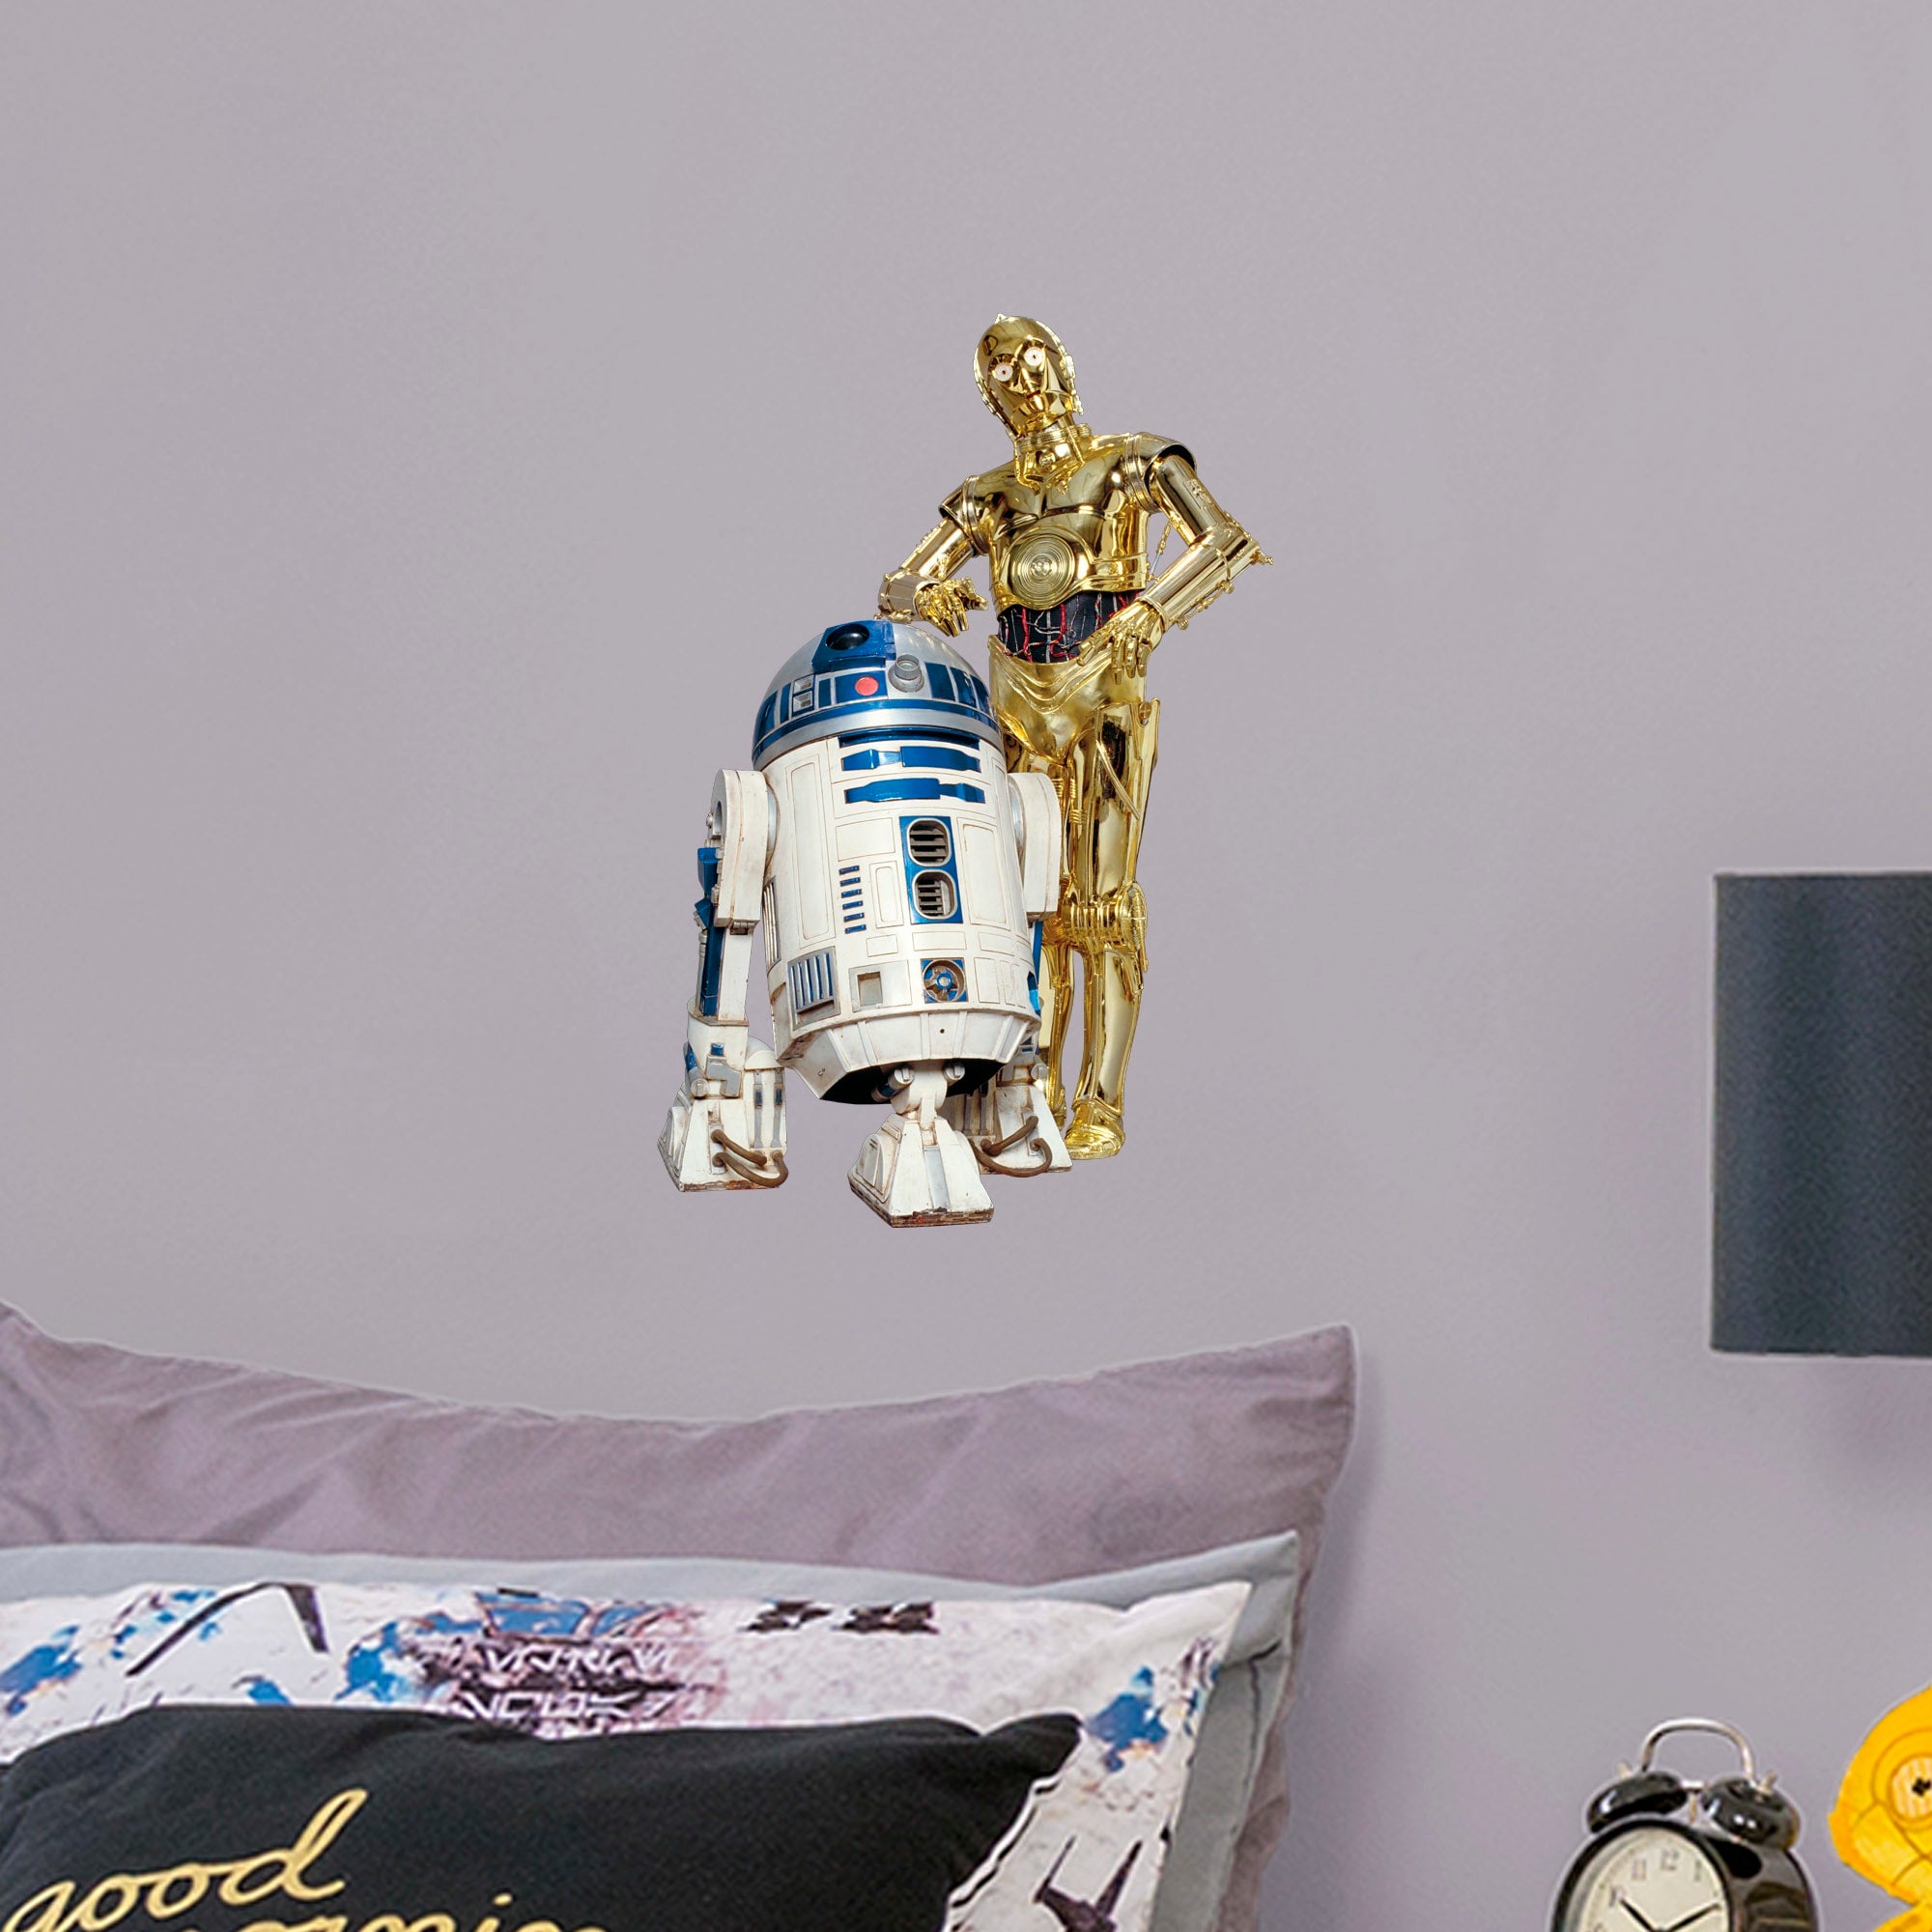 C-3PO & R2-D2 - Officially Licensed Removable Wall Decal Large by Fathead | Vinyl